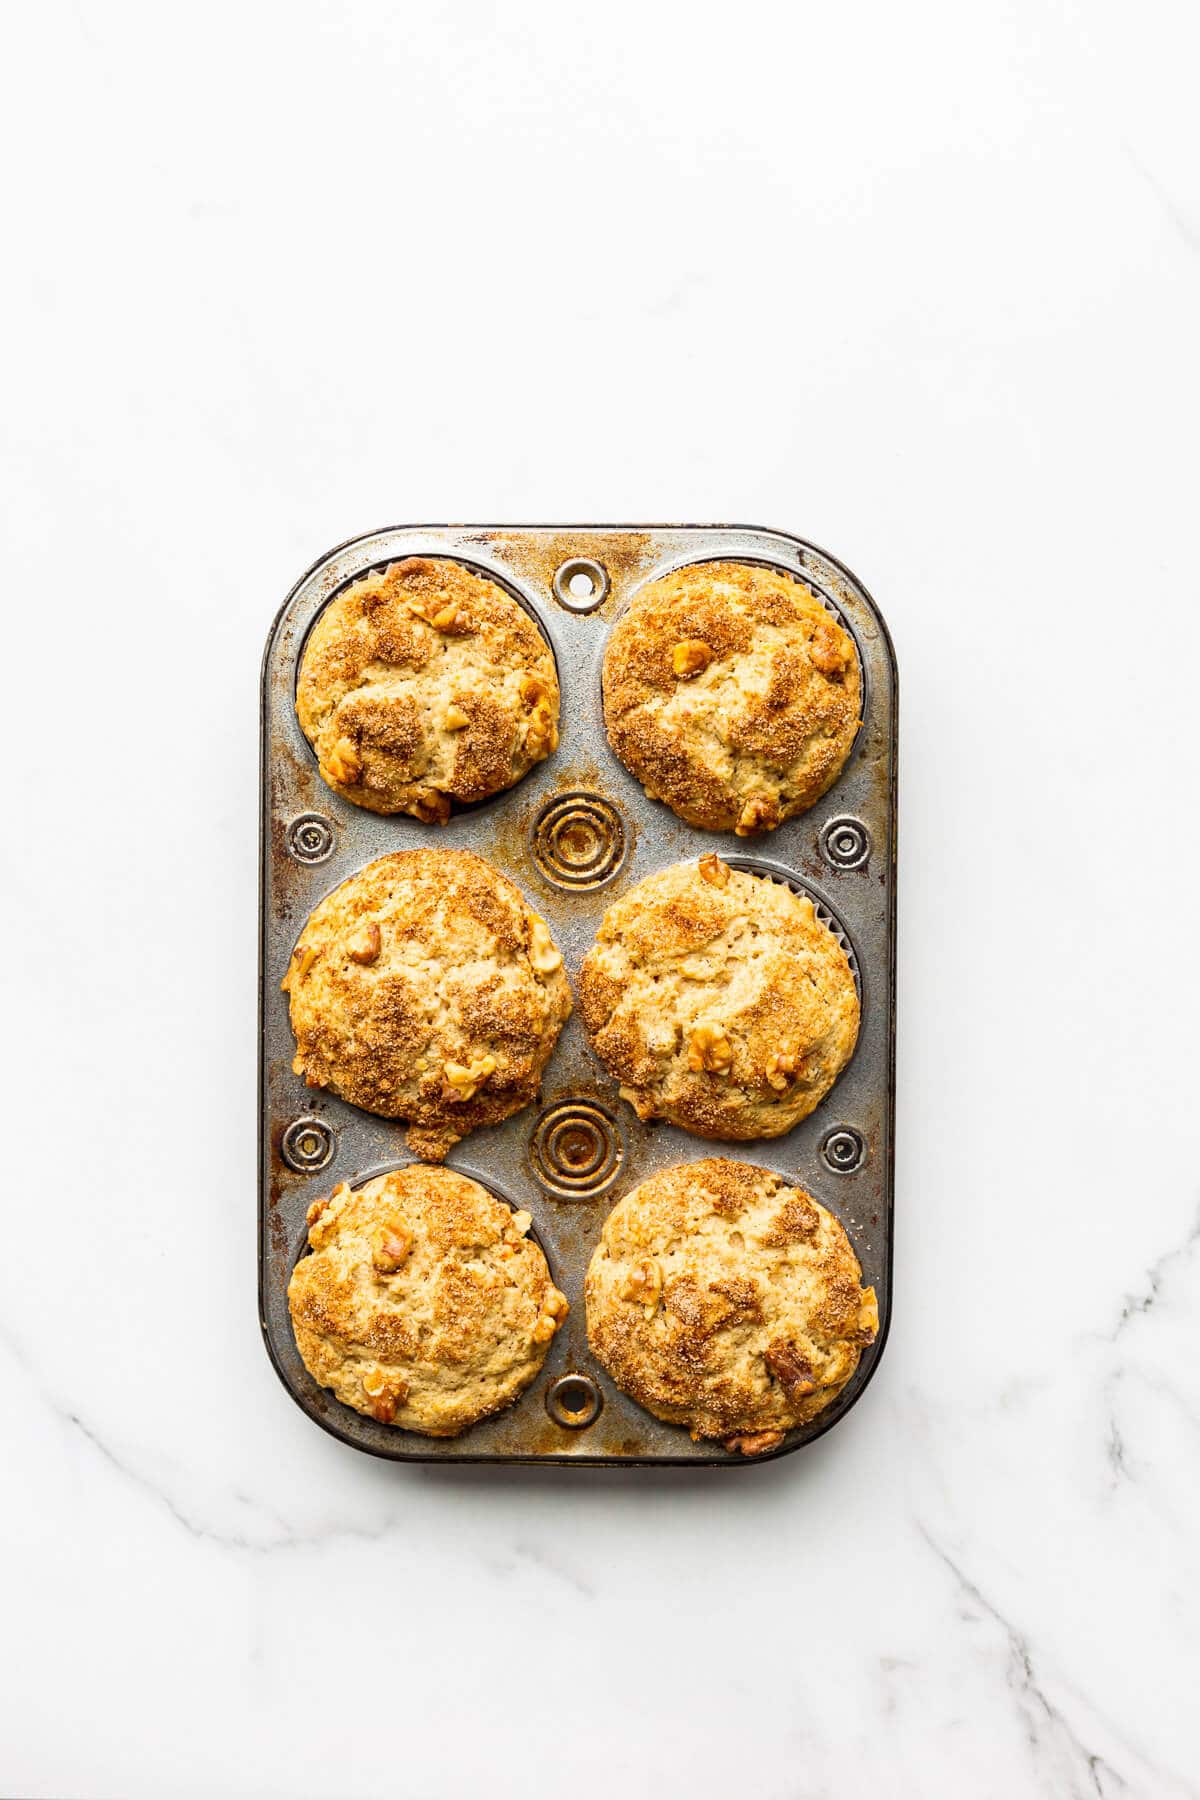 A muffin pan of carrot muffins, freshly baked and cooling.